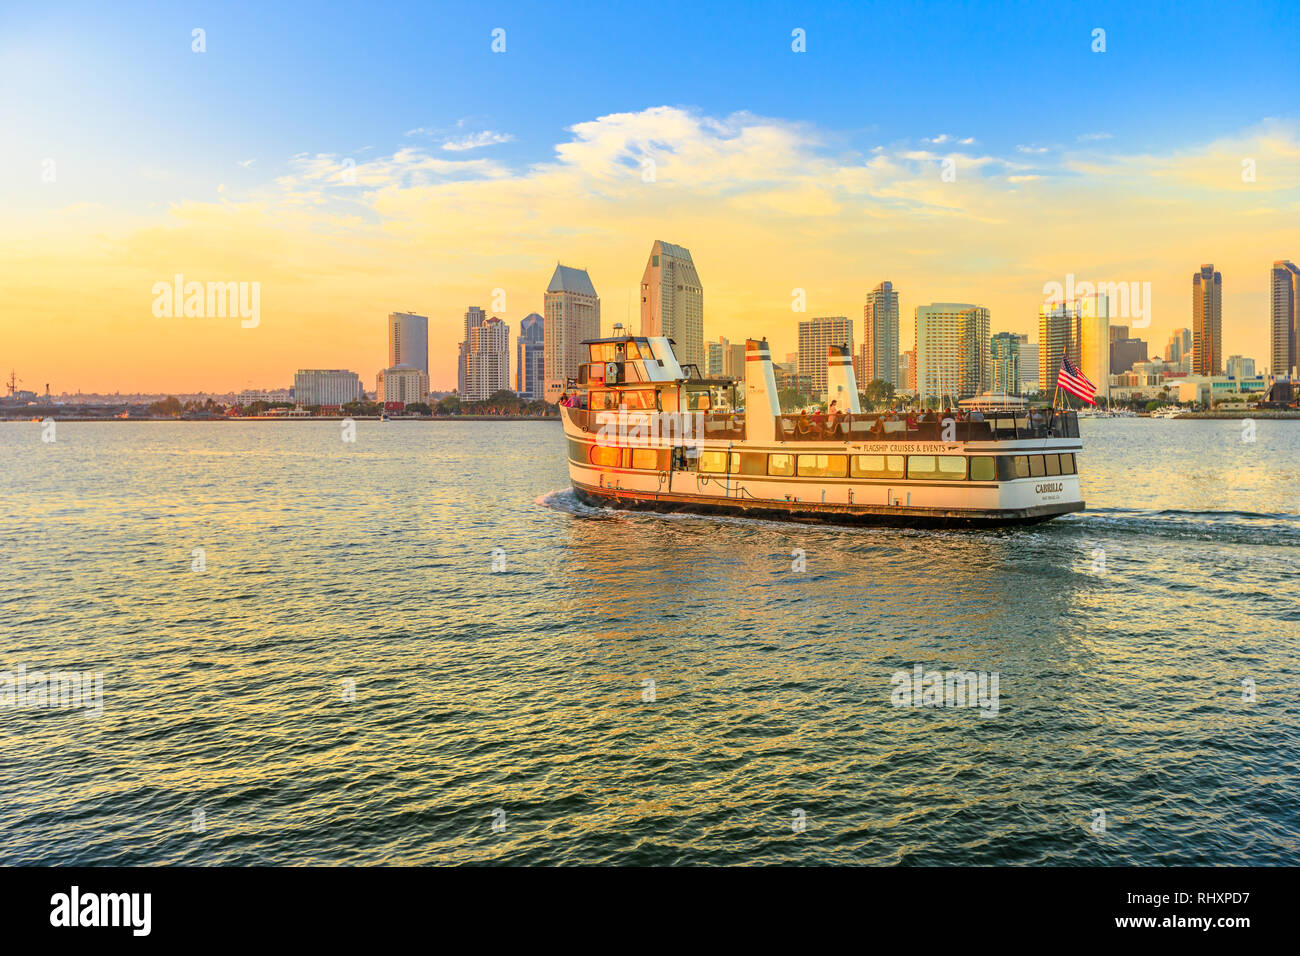 San Diego, California, United States - August 1, 2018: ferry cruise goes into waters of San Diego Bay with San Diego skyline waterfront marina and Stock Photo